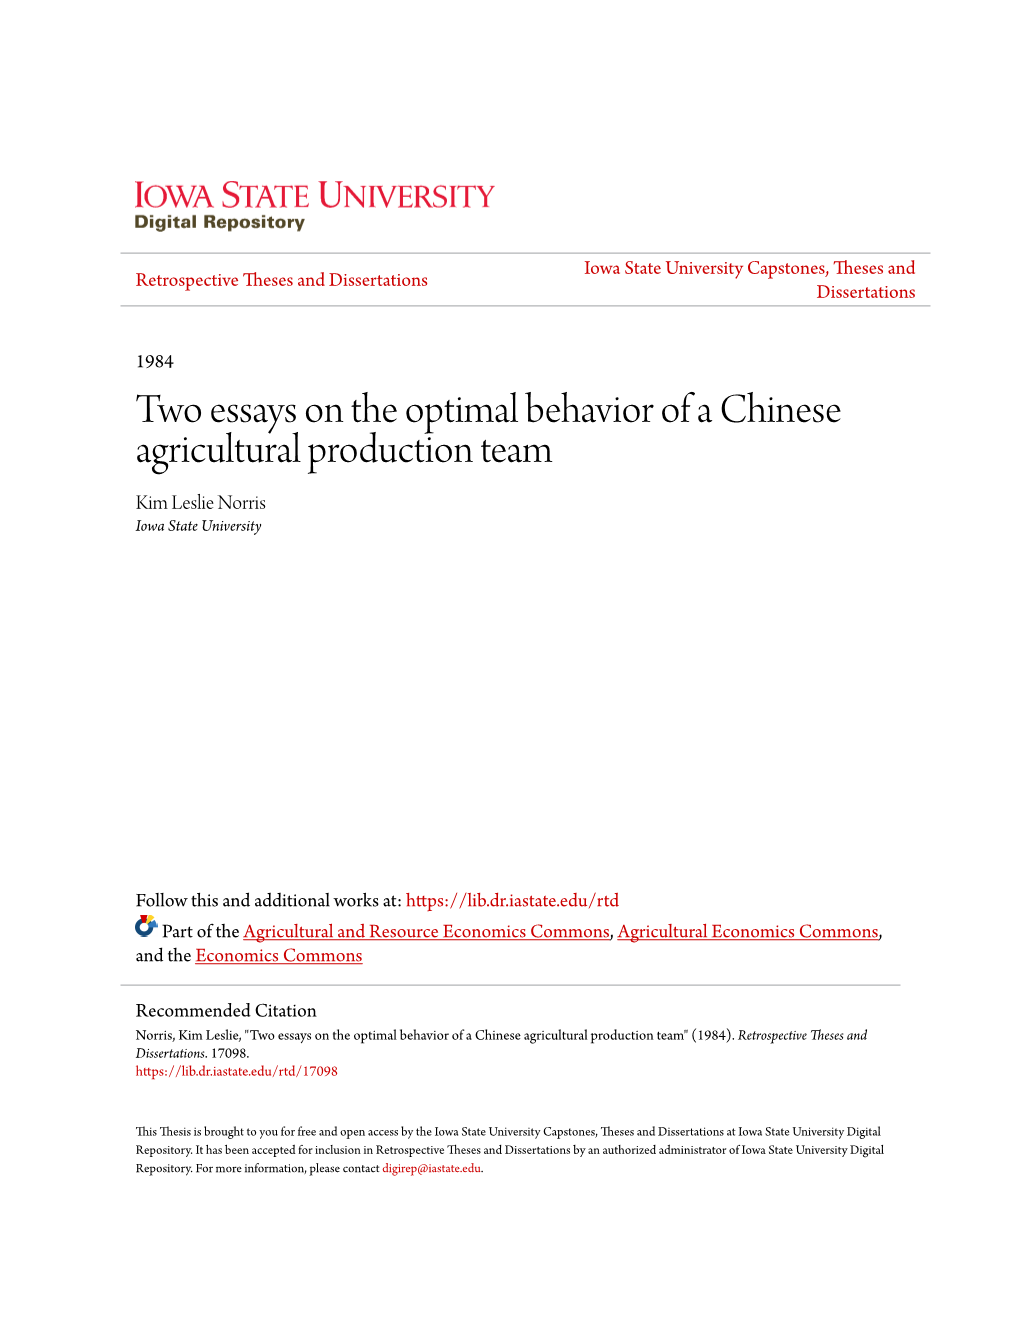 Two Essays on the Optimal Behavior of a Chinese Agricultural Production Team Kim Leslie Norris Iowa State University